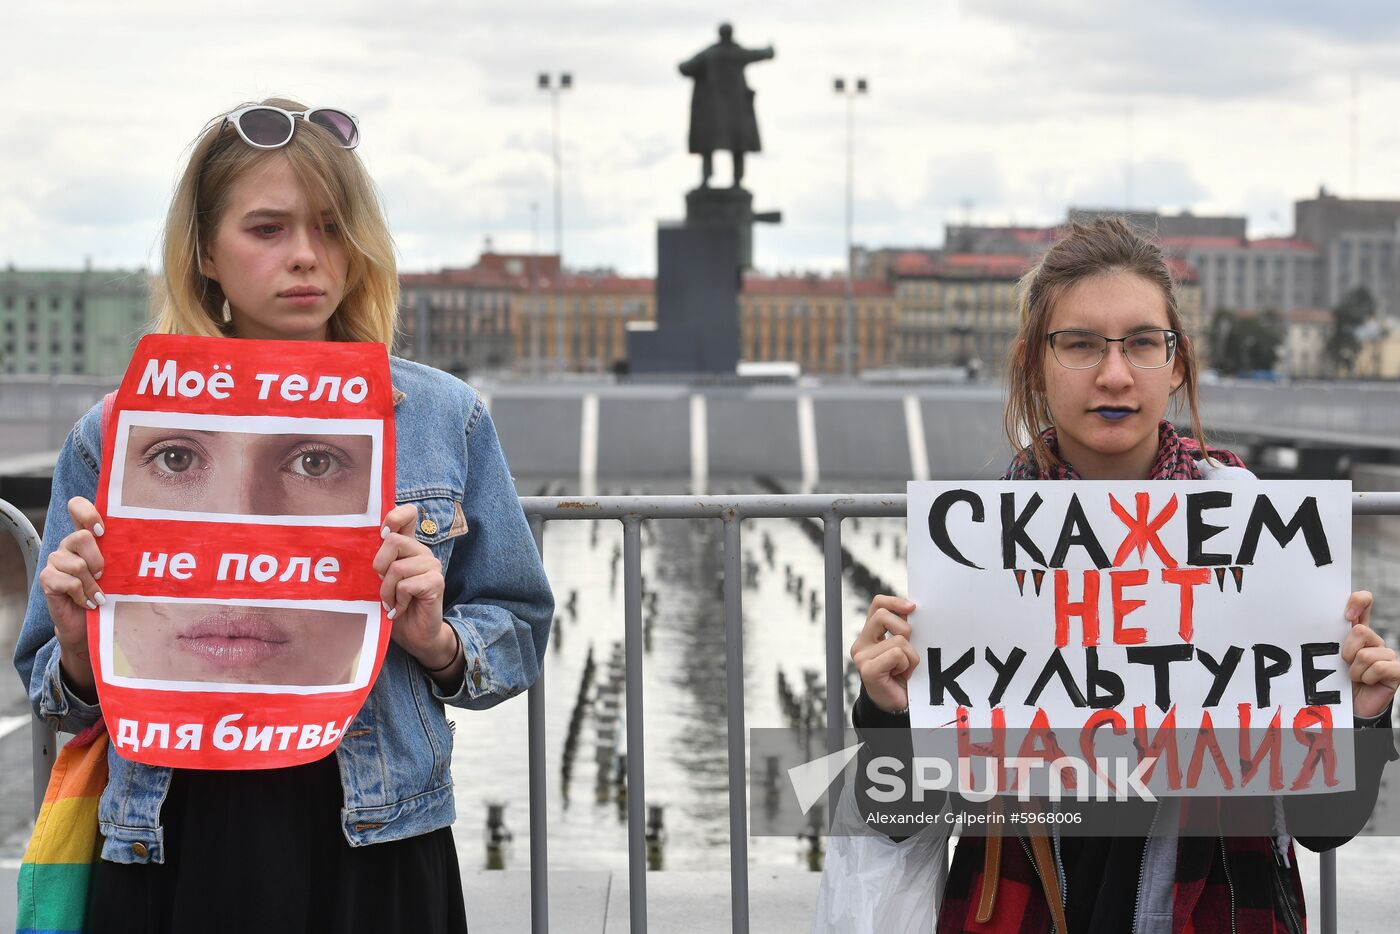 Russia Khachaturyan Sisters' Protest